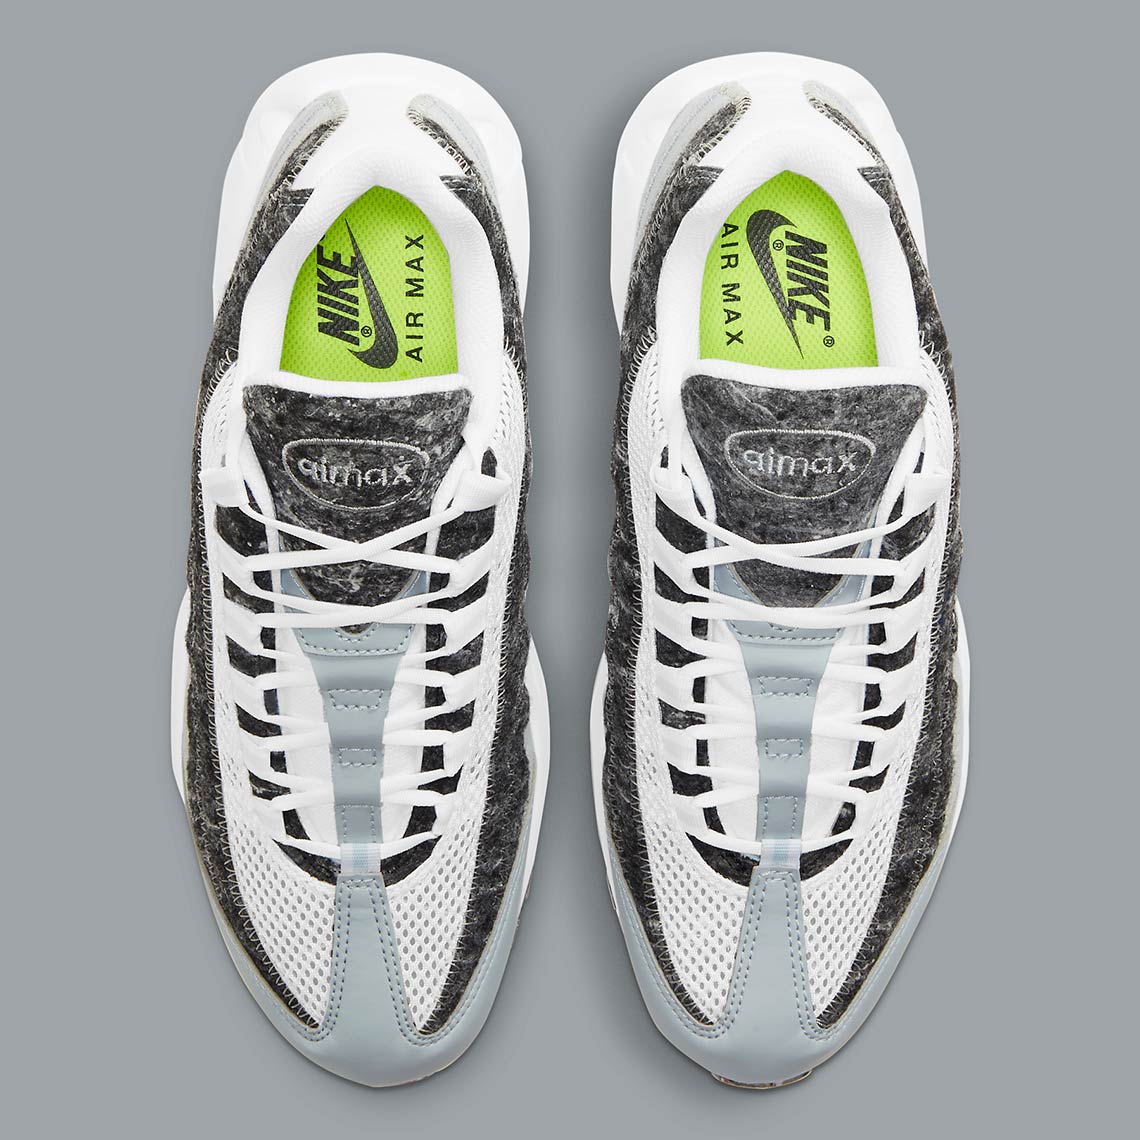 Nike Air Max 95 Crater Cv8830 400 Release Info 3